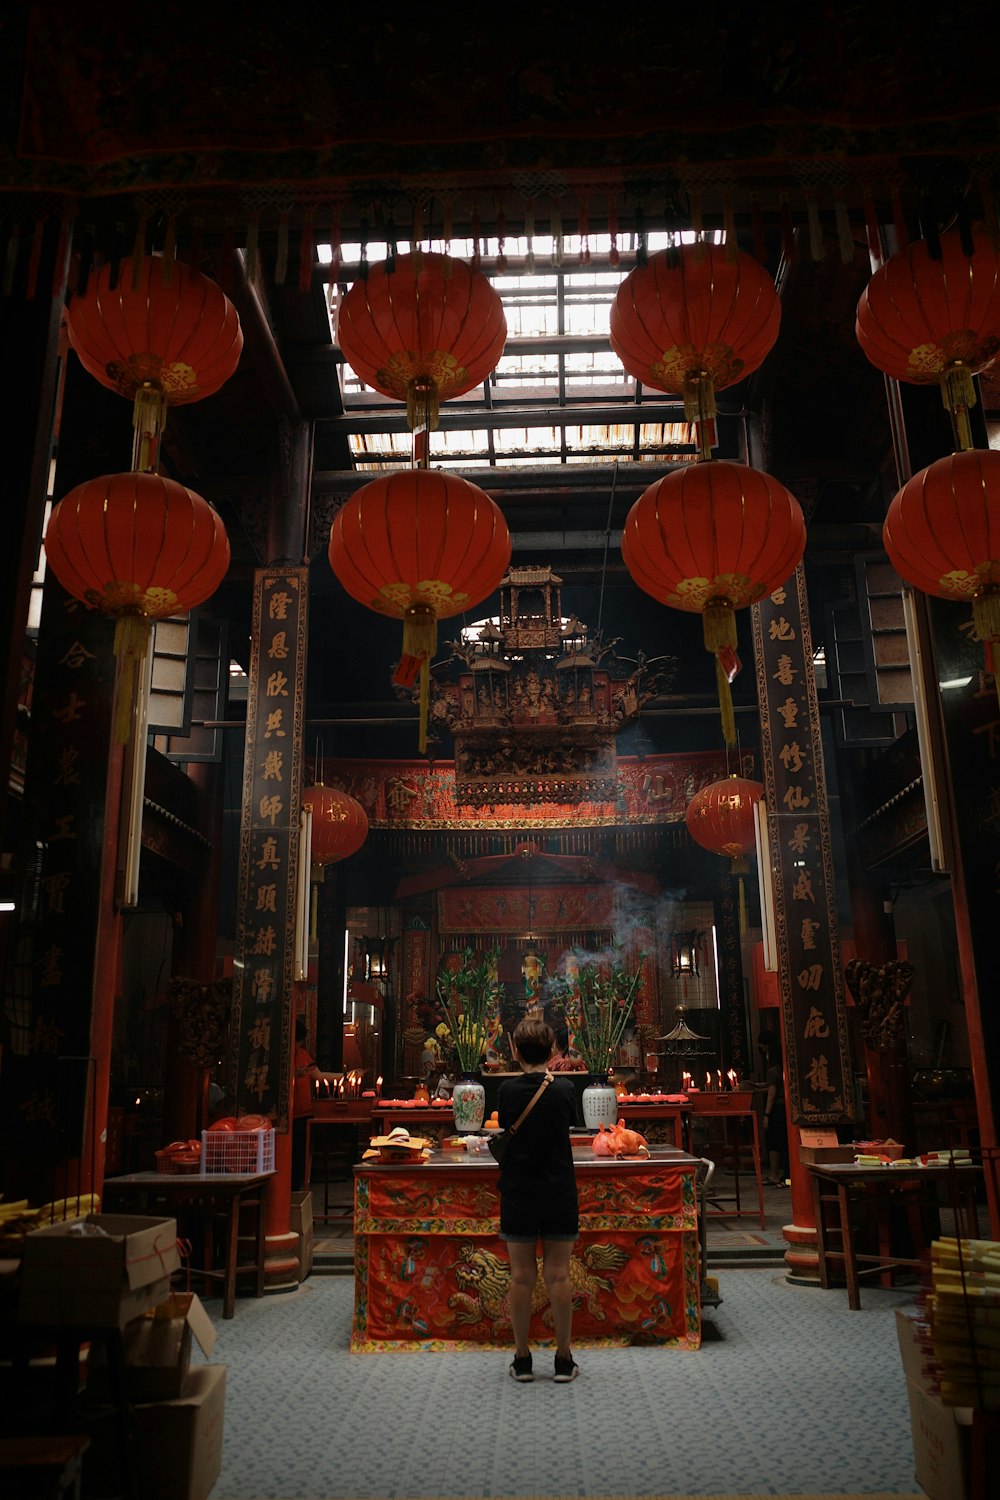 a person standing in a room with red lanterns